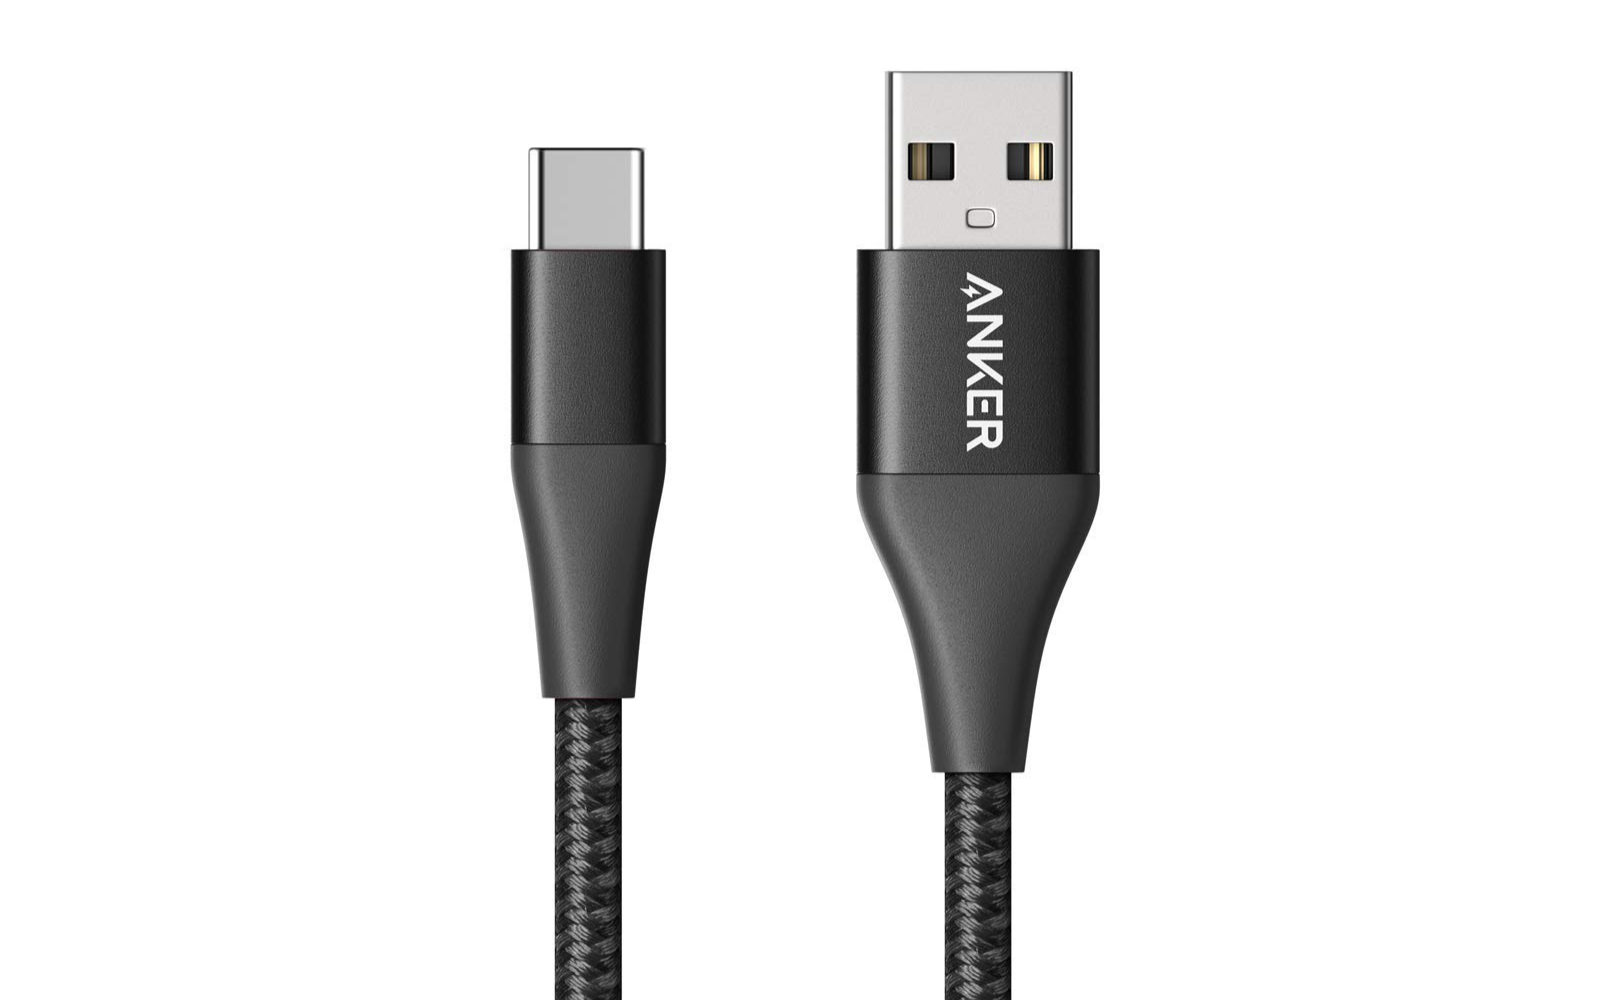 Anker-PowerlinePlus-USB-C-USB-A-cable.jpg